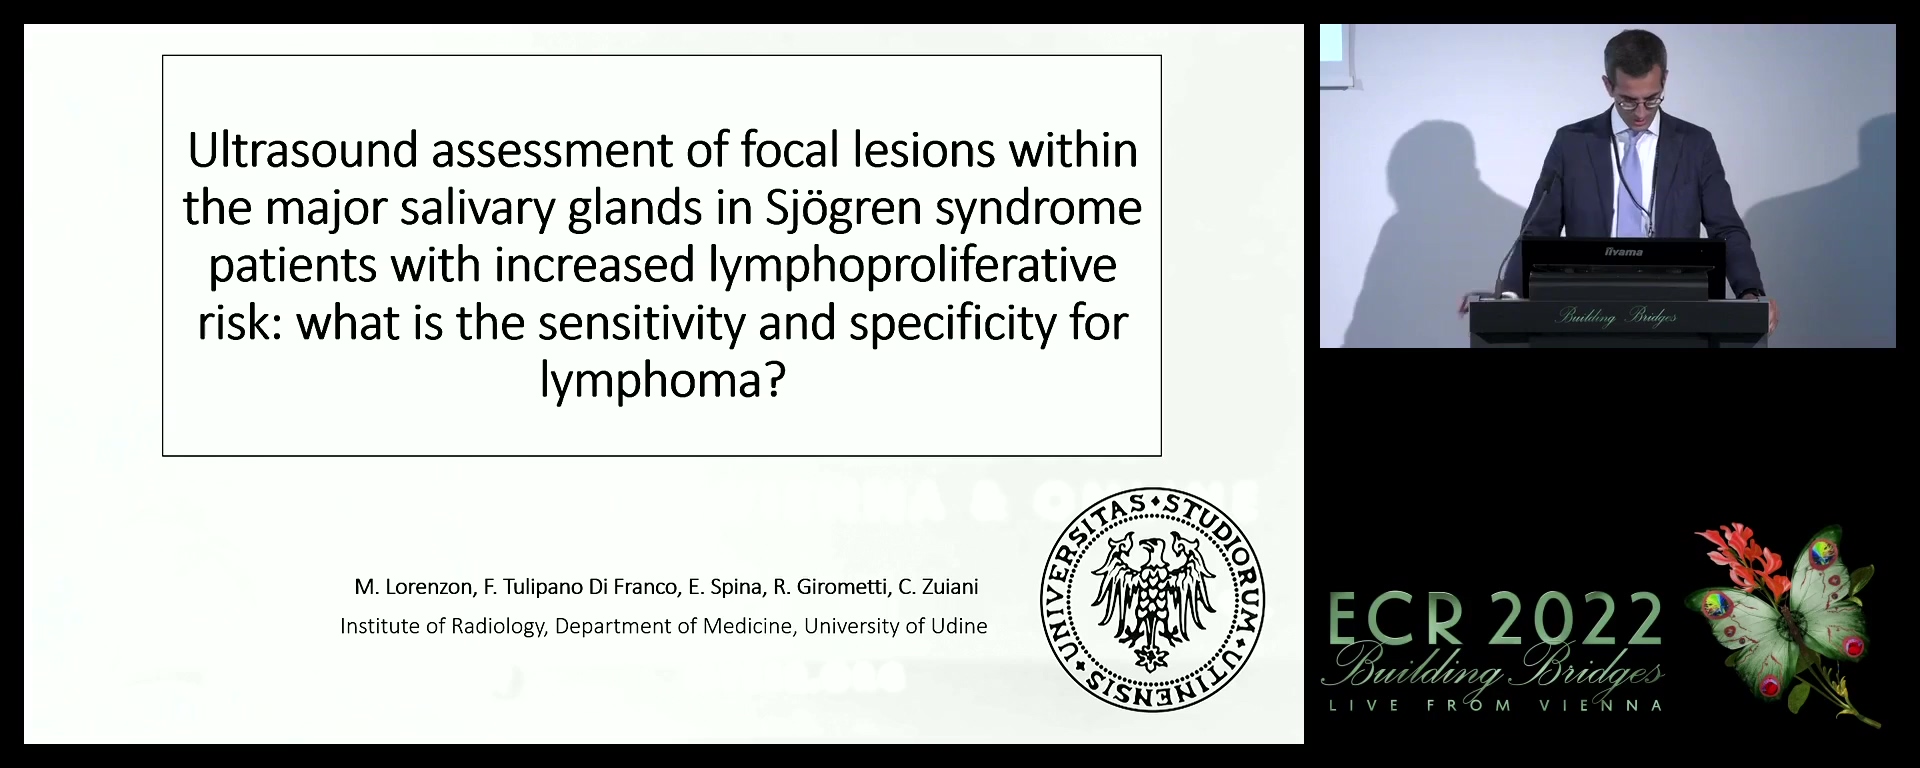 Ultrasound assessment of focal lesions within the major salivary glands in Sjögren syndrome patients with increased lymphoproliferative risk: what is the sensitivity and specificity for lymphoma?